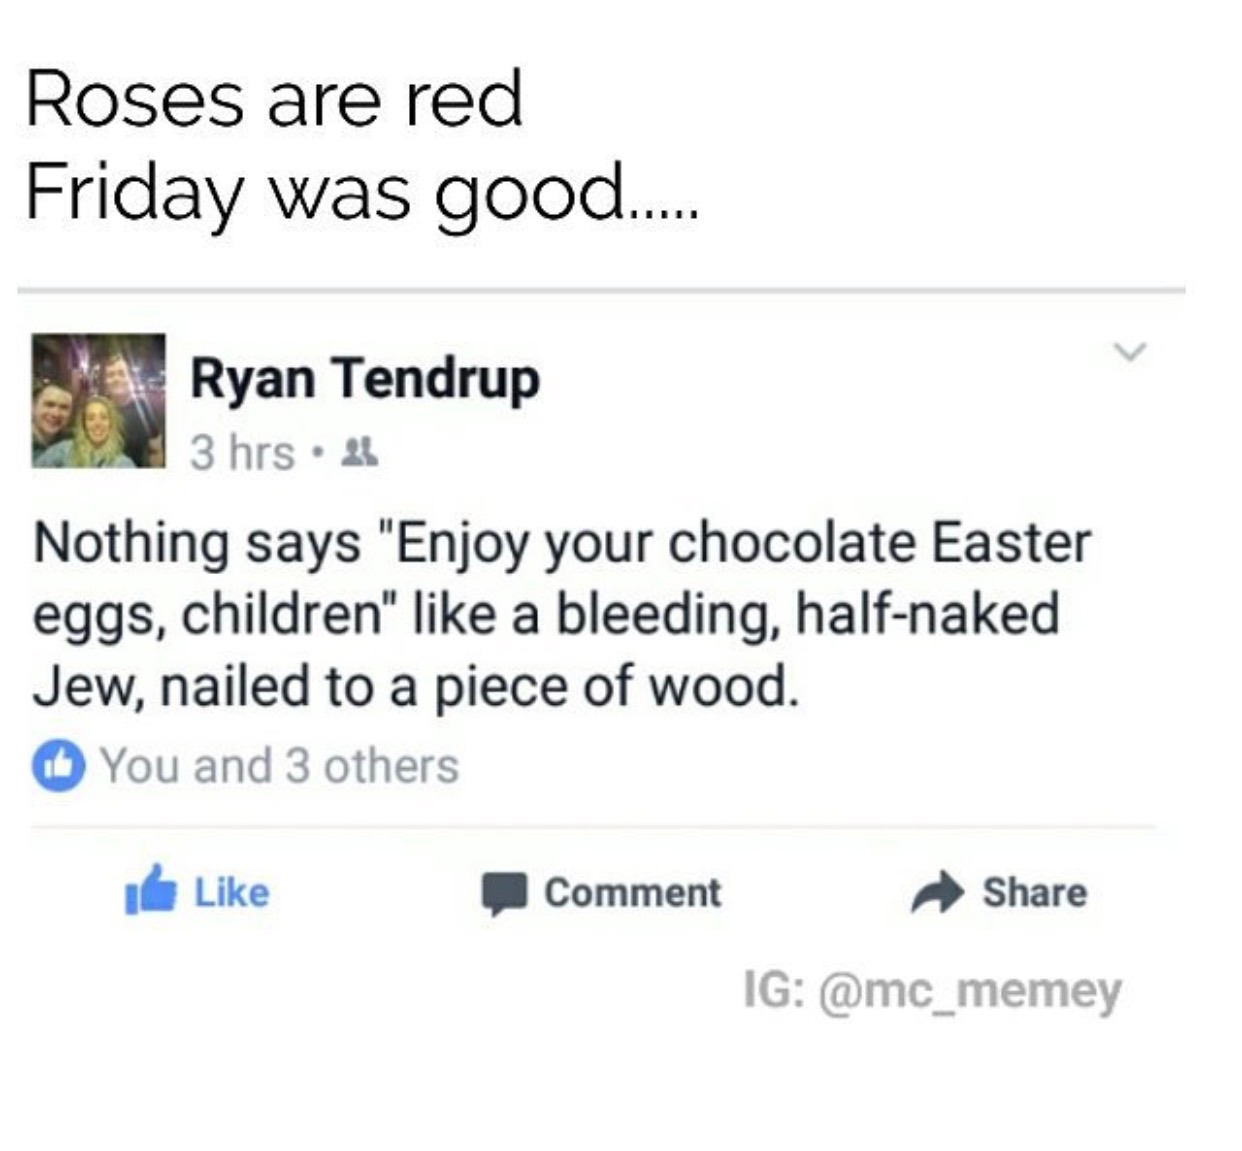 angle - Roses are red Friday was good..... Ryan Tendrup 3 hrs. Nothing says "Enjoy your chocolate Easter eggs, children" a bleeding, halfnaked Jew, nailed to a piece of wood. You and 3 others Comment Ig